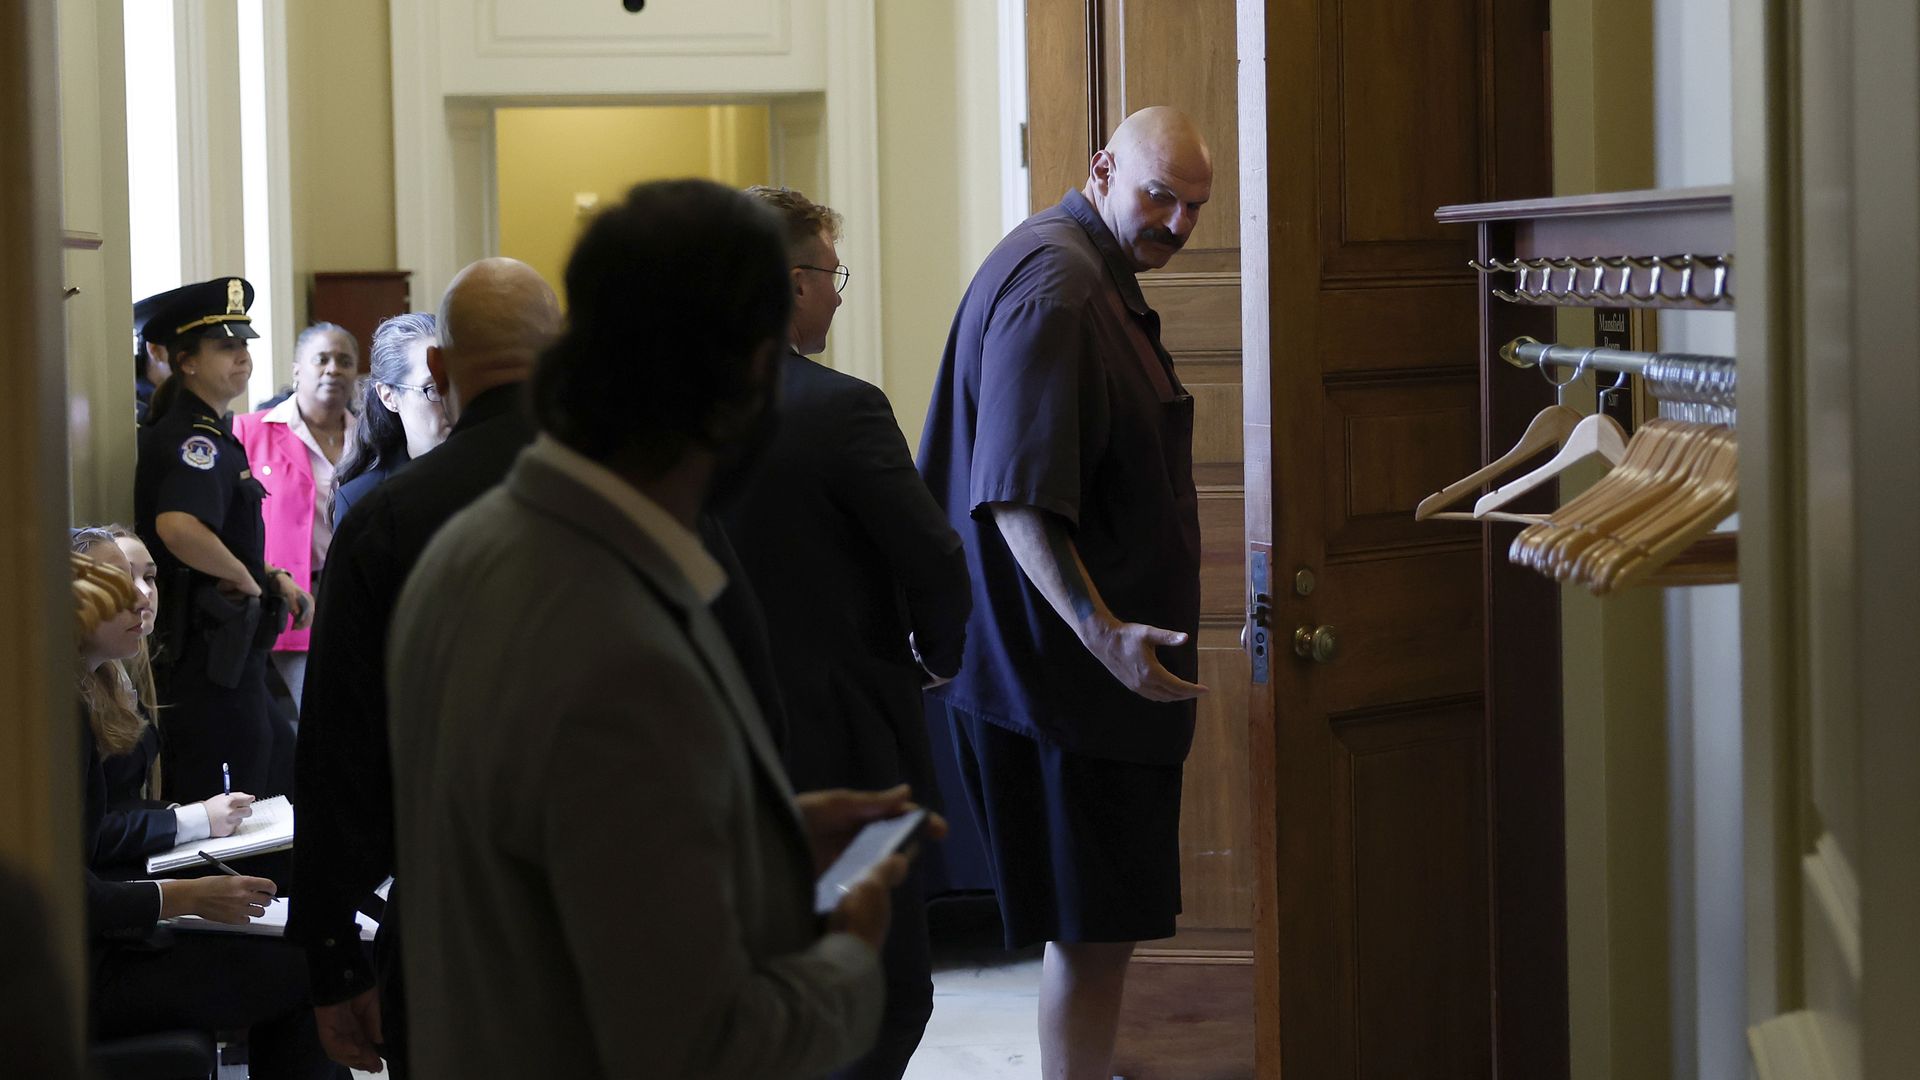 Pennsylvania Senator John Fetterman, wearing a blue short-sleeved shirt and short pants, is shown in a hallway in the U.S. Capitol.